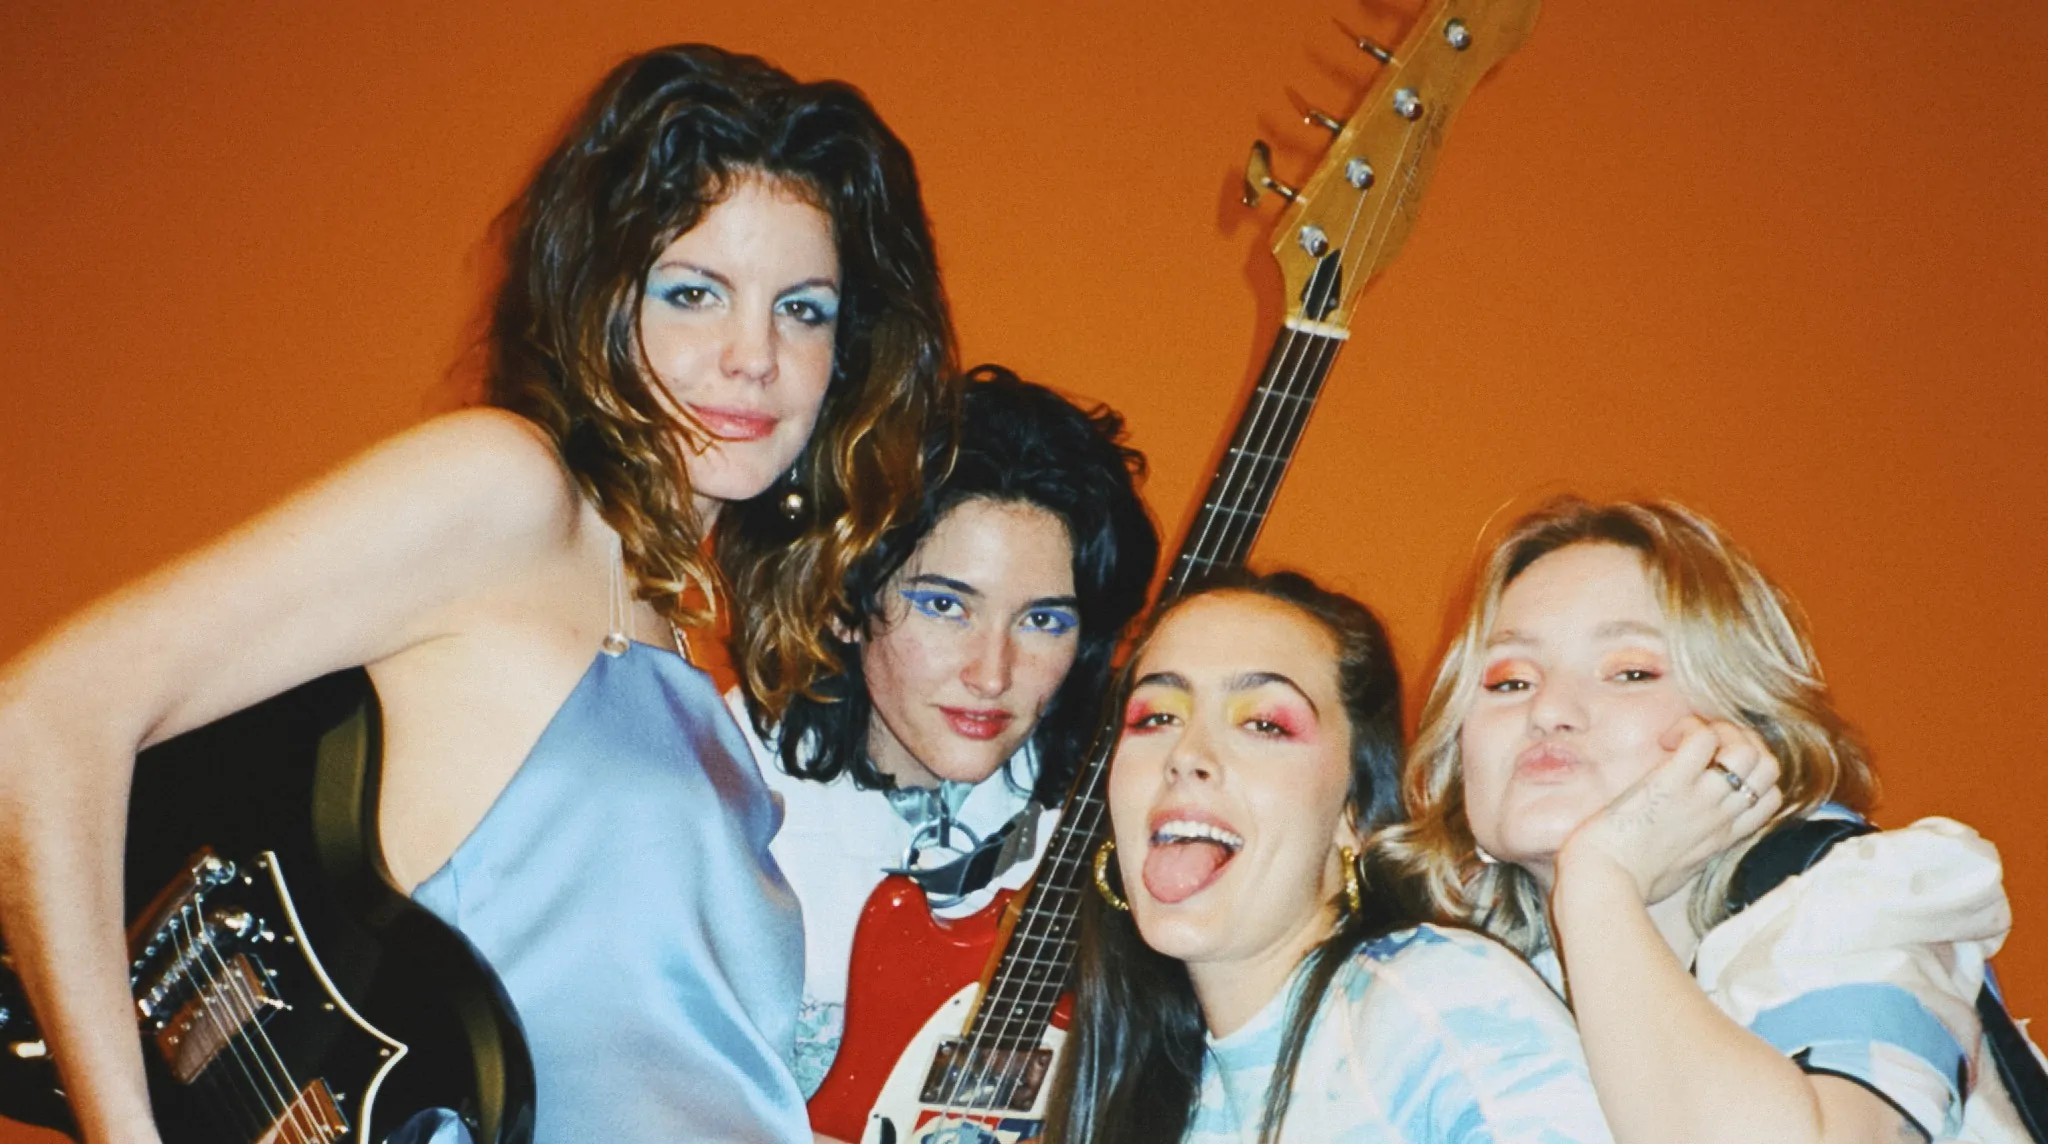 HINDS share their new single ‘Just Like Kids (Miau)’ – Watch Video